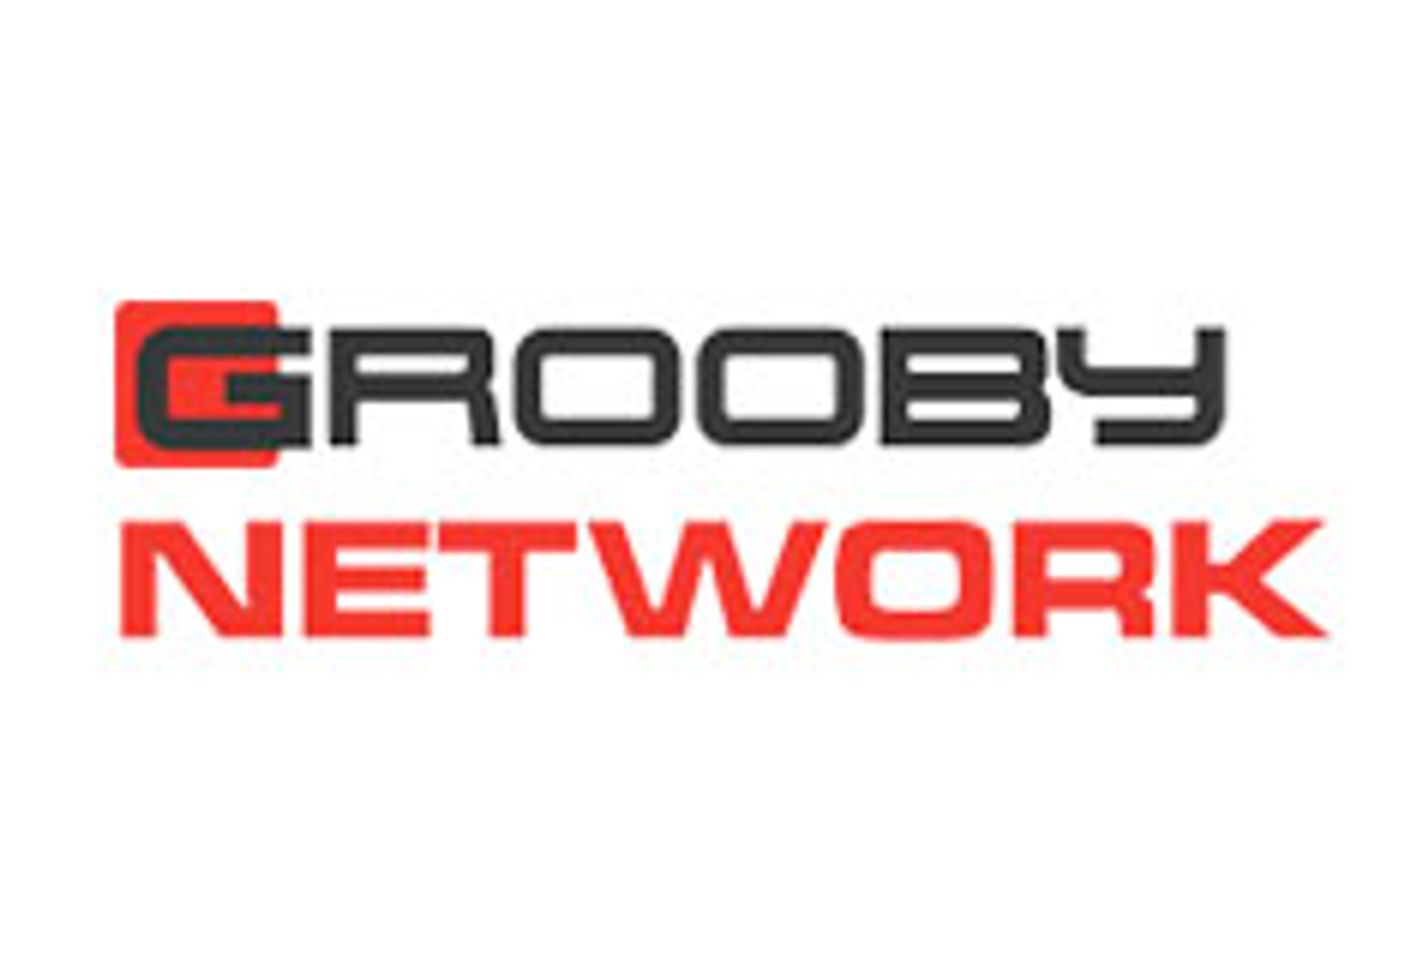 TS Performer Kacy Launches Site With Grooby Network